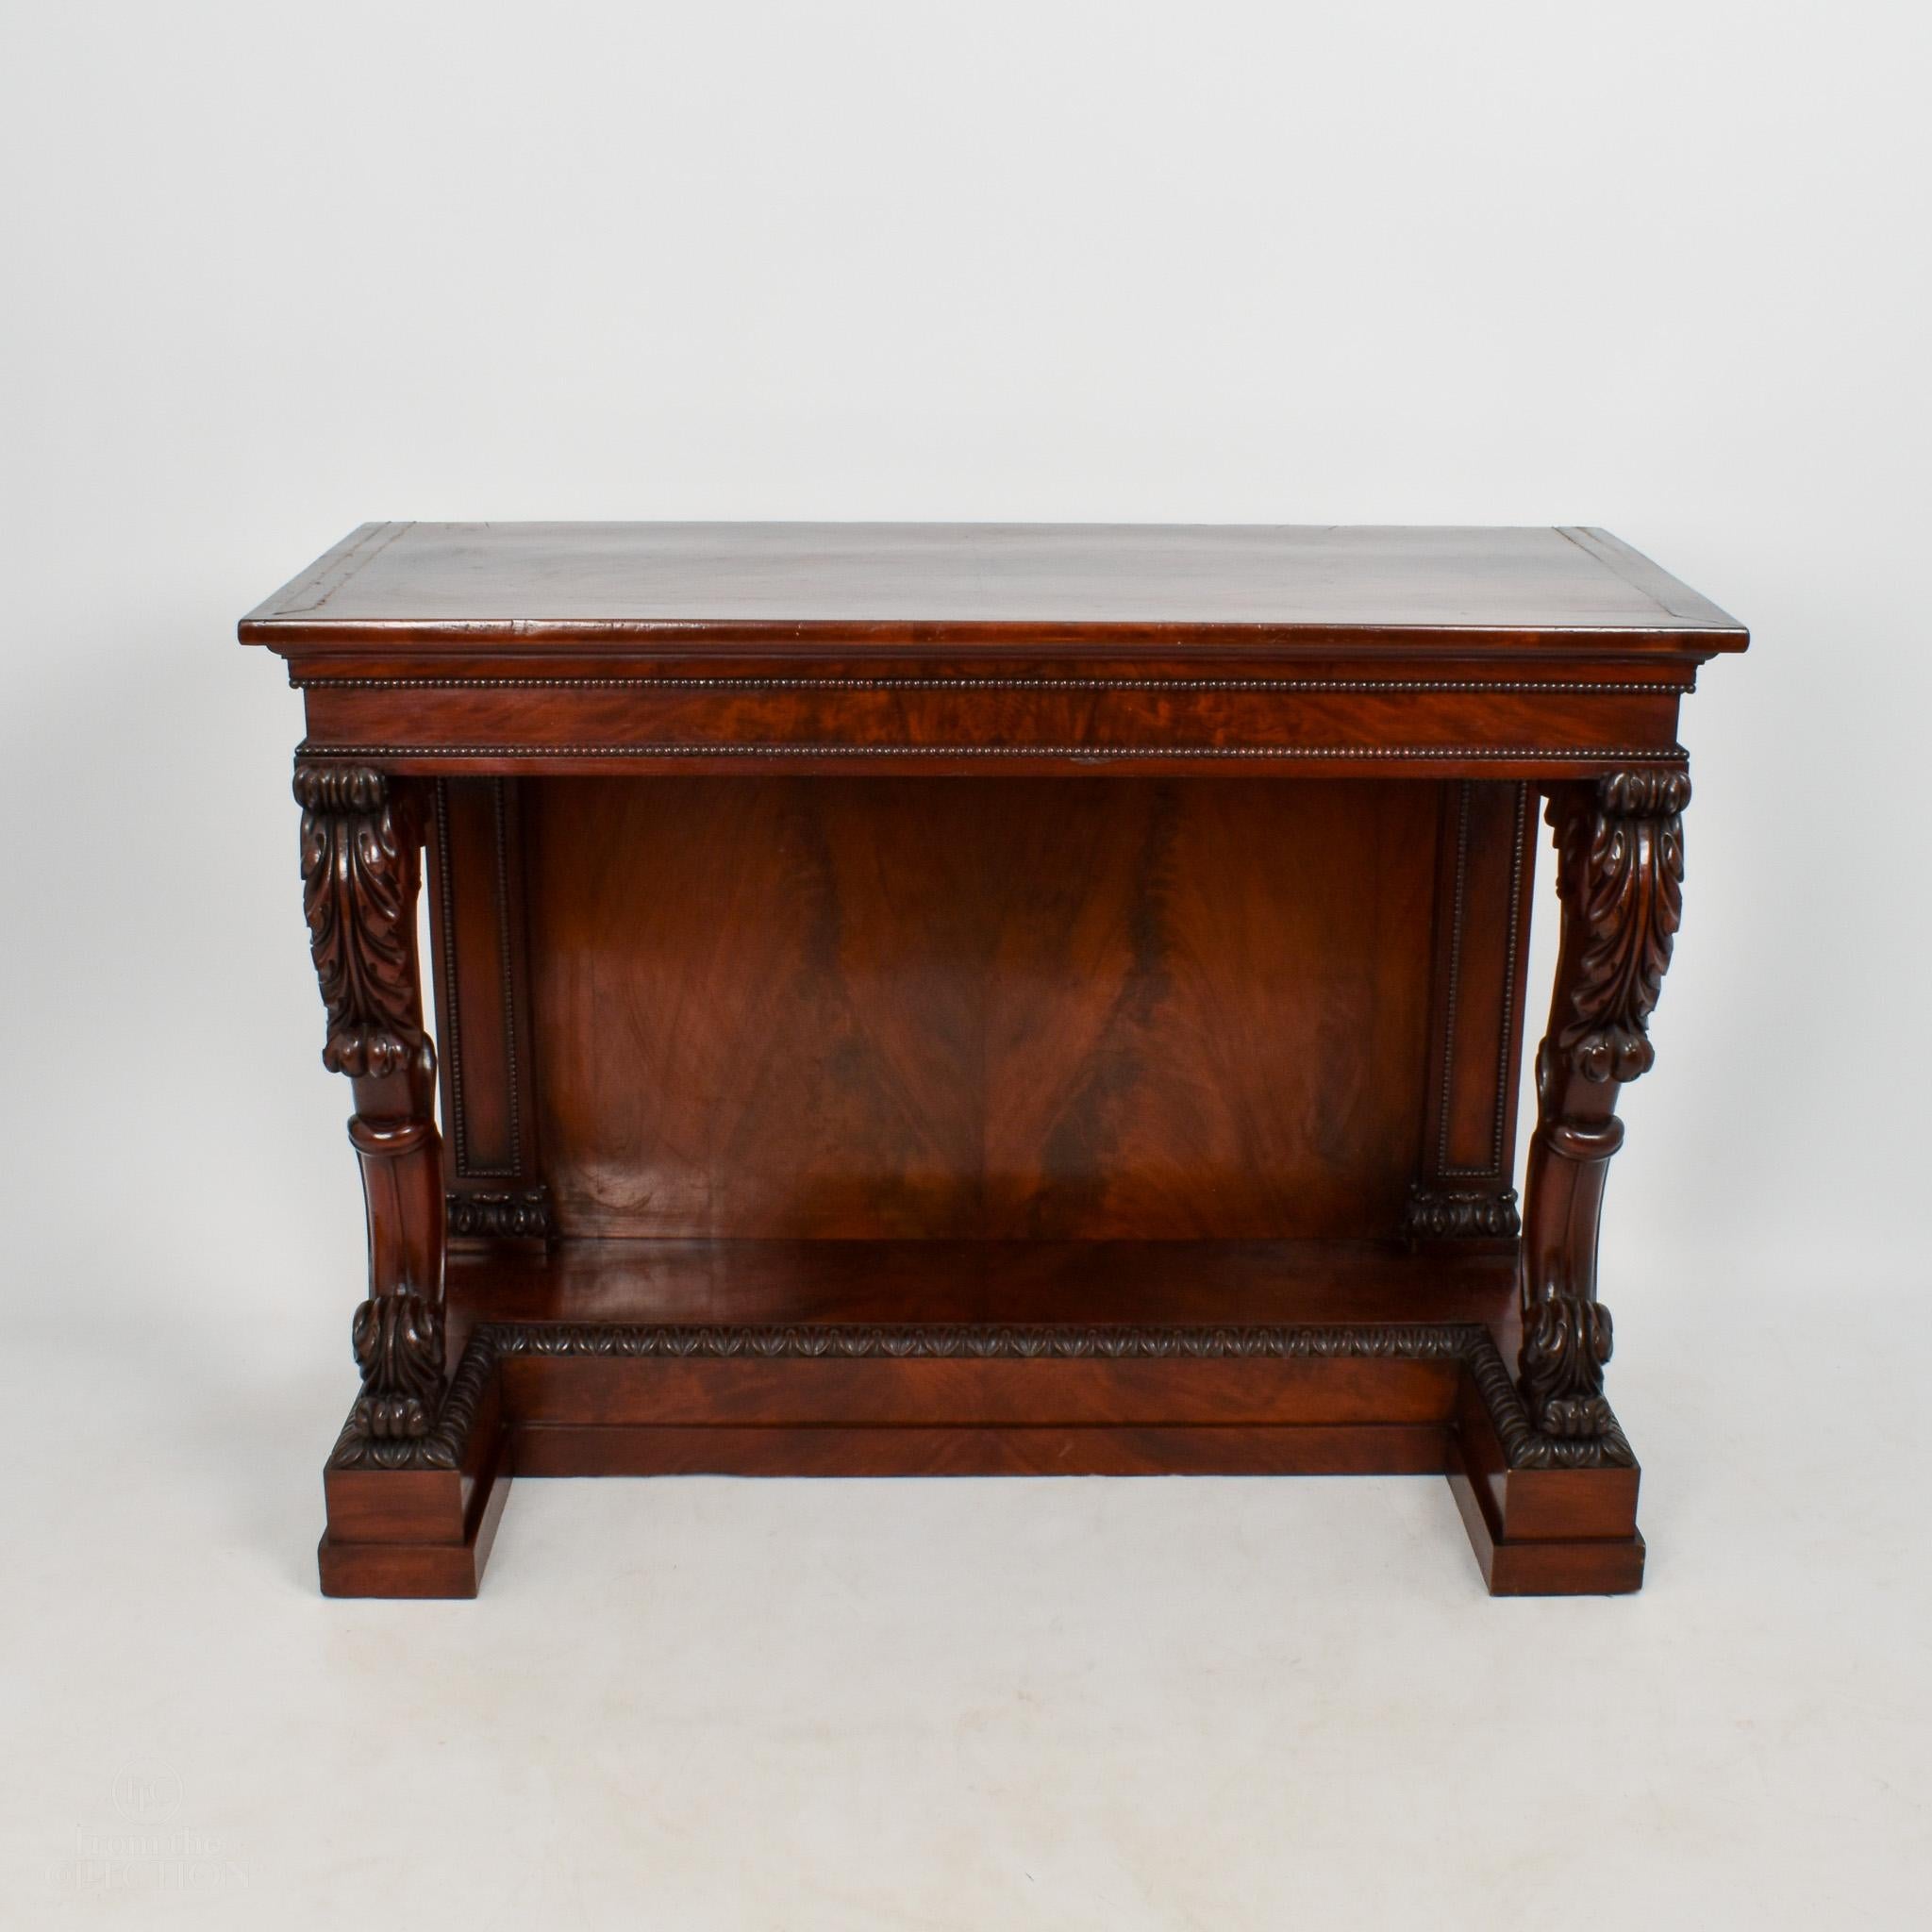 An exceptional pair of William IV Mahogany console tables circa 1840. Exceptional rich colour and quality. Possibly made by Gillows with brass stringing to the top and beautifully carved supports to the front on carved feet and with a panel back.